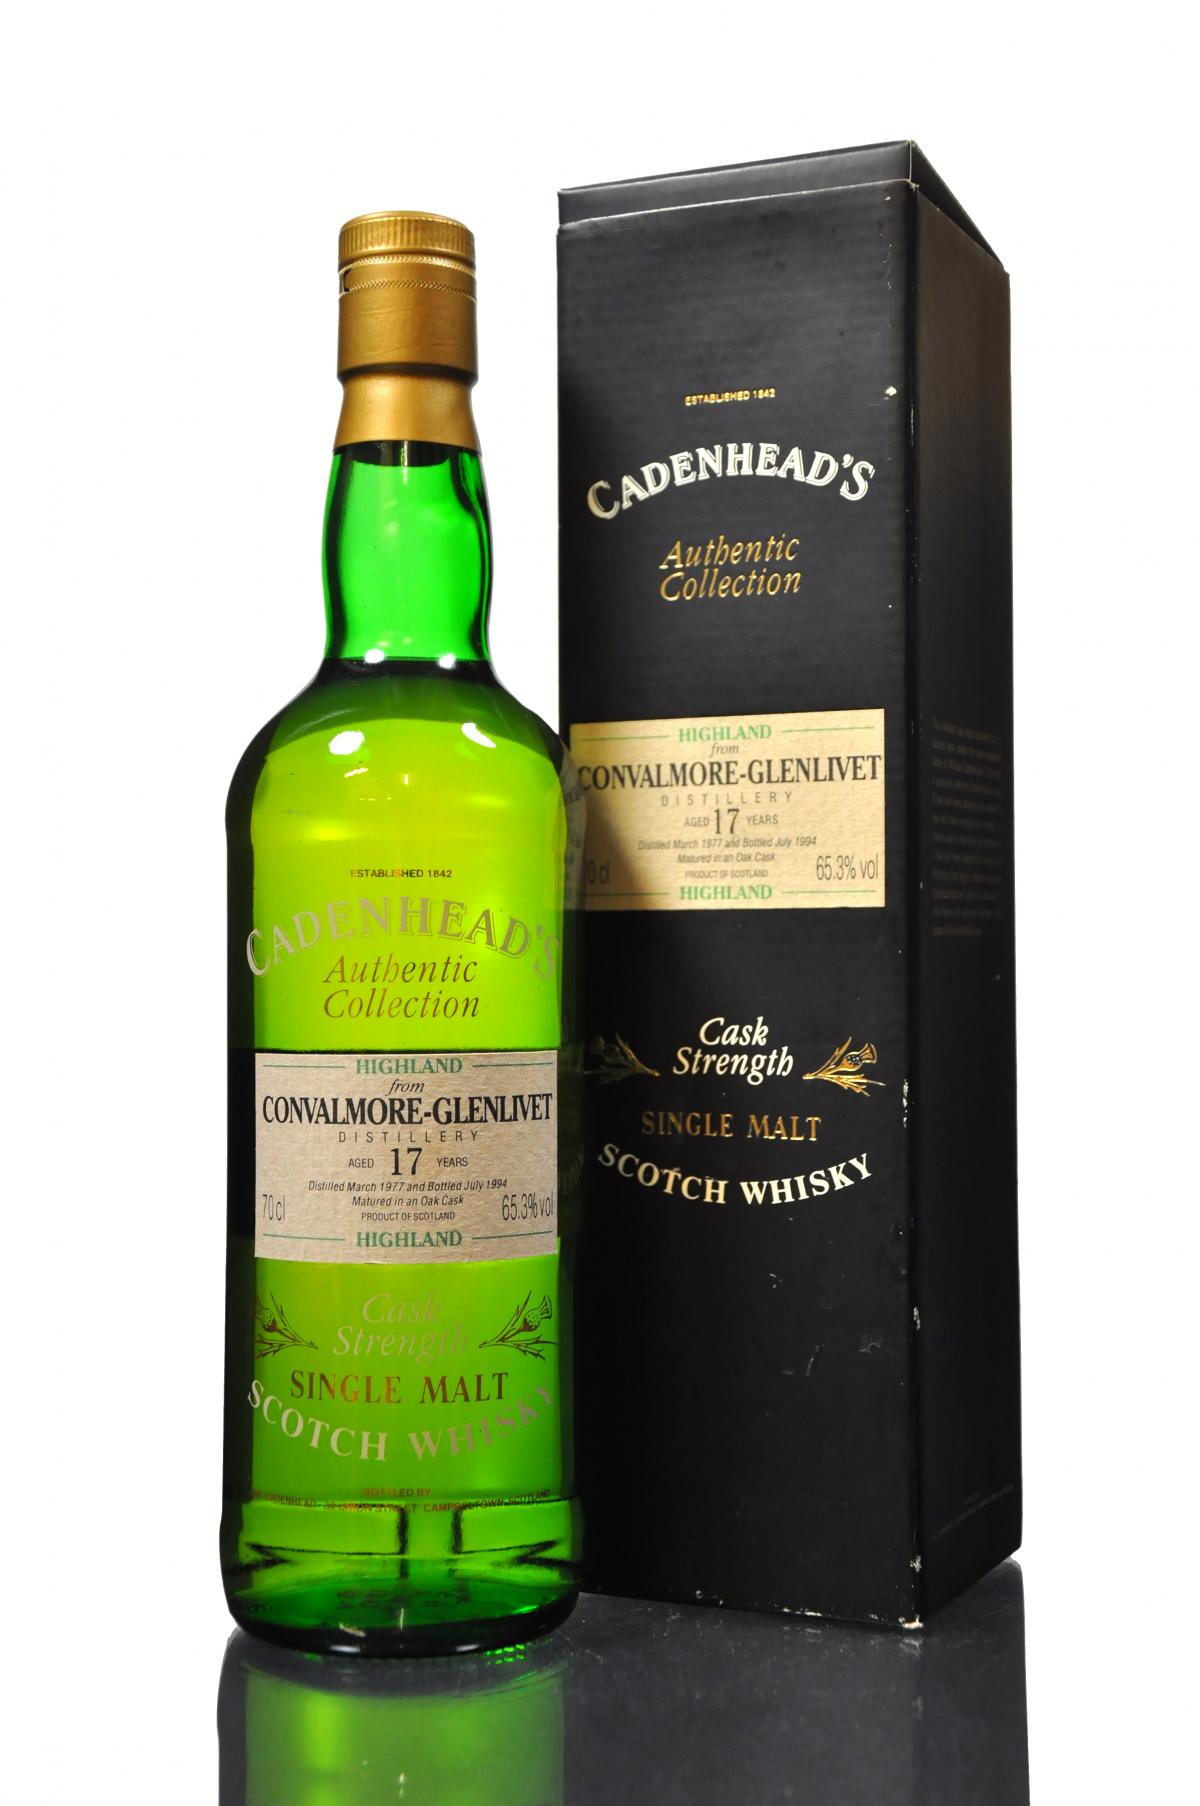 Convalmore-Glenlivet 1977-1994 - 17 Year Old - Cadenheads Authentic Collection